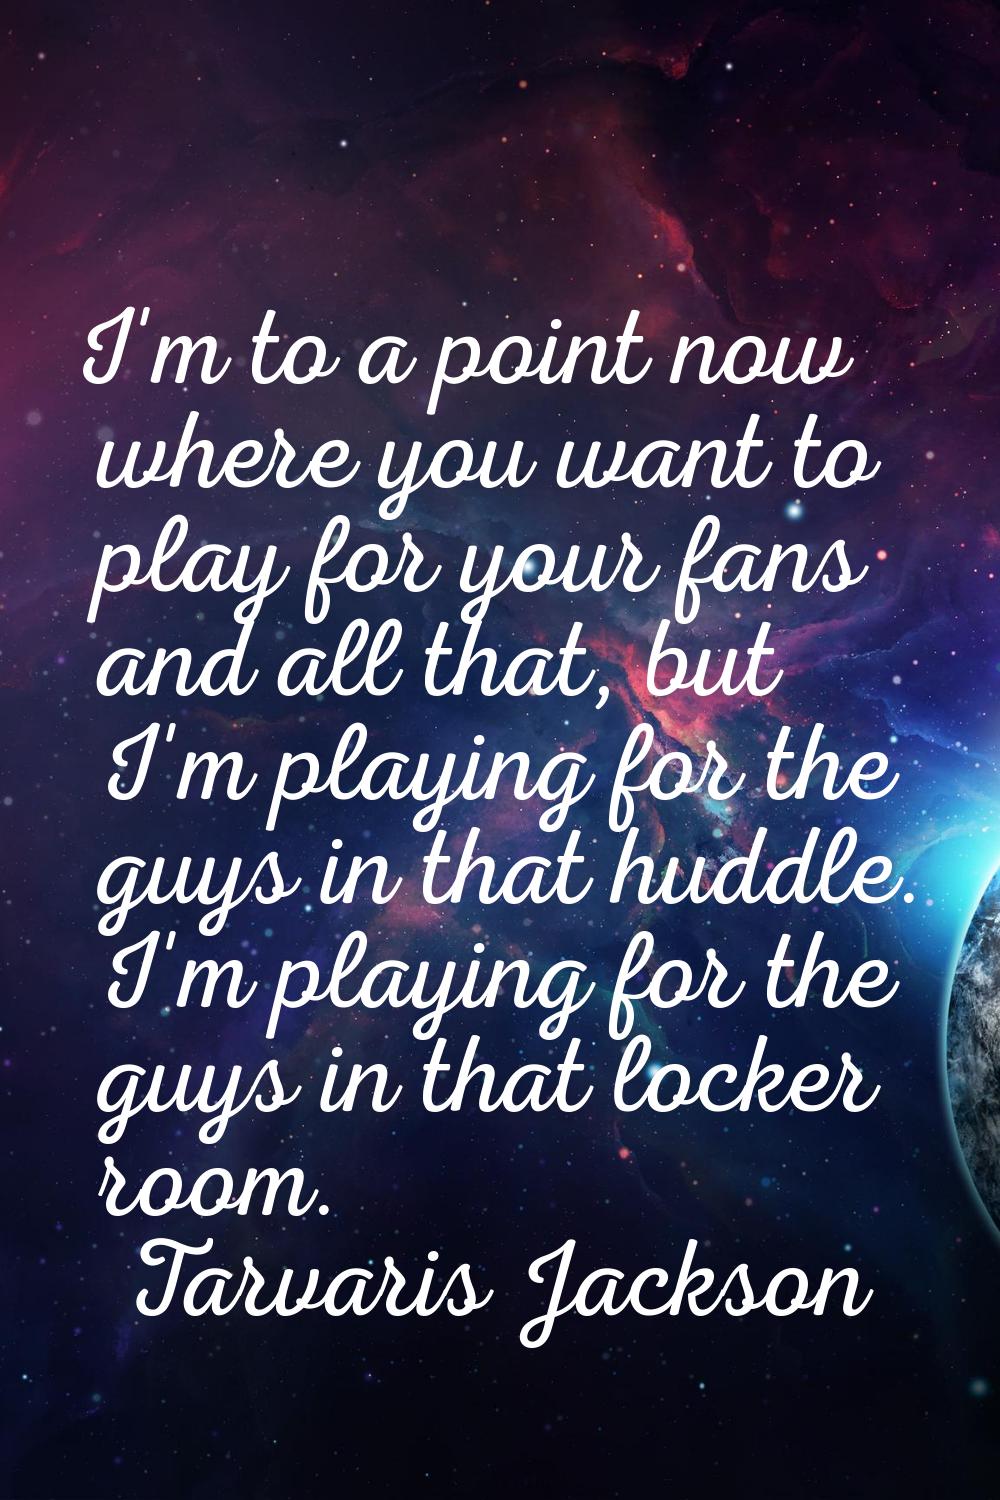 I'm to a point now where you want to play for your fans and all that, but I'm playing for the guys 